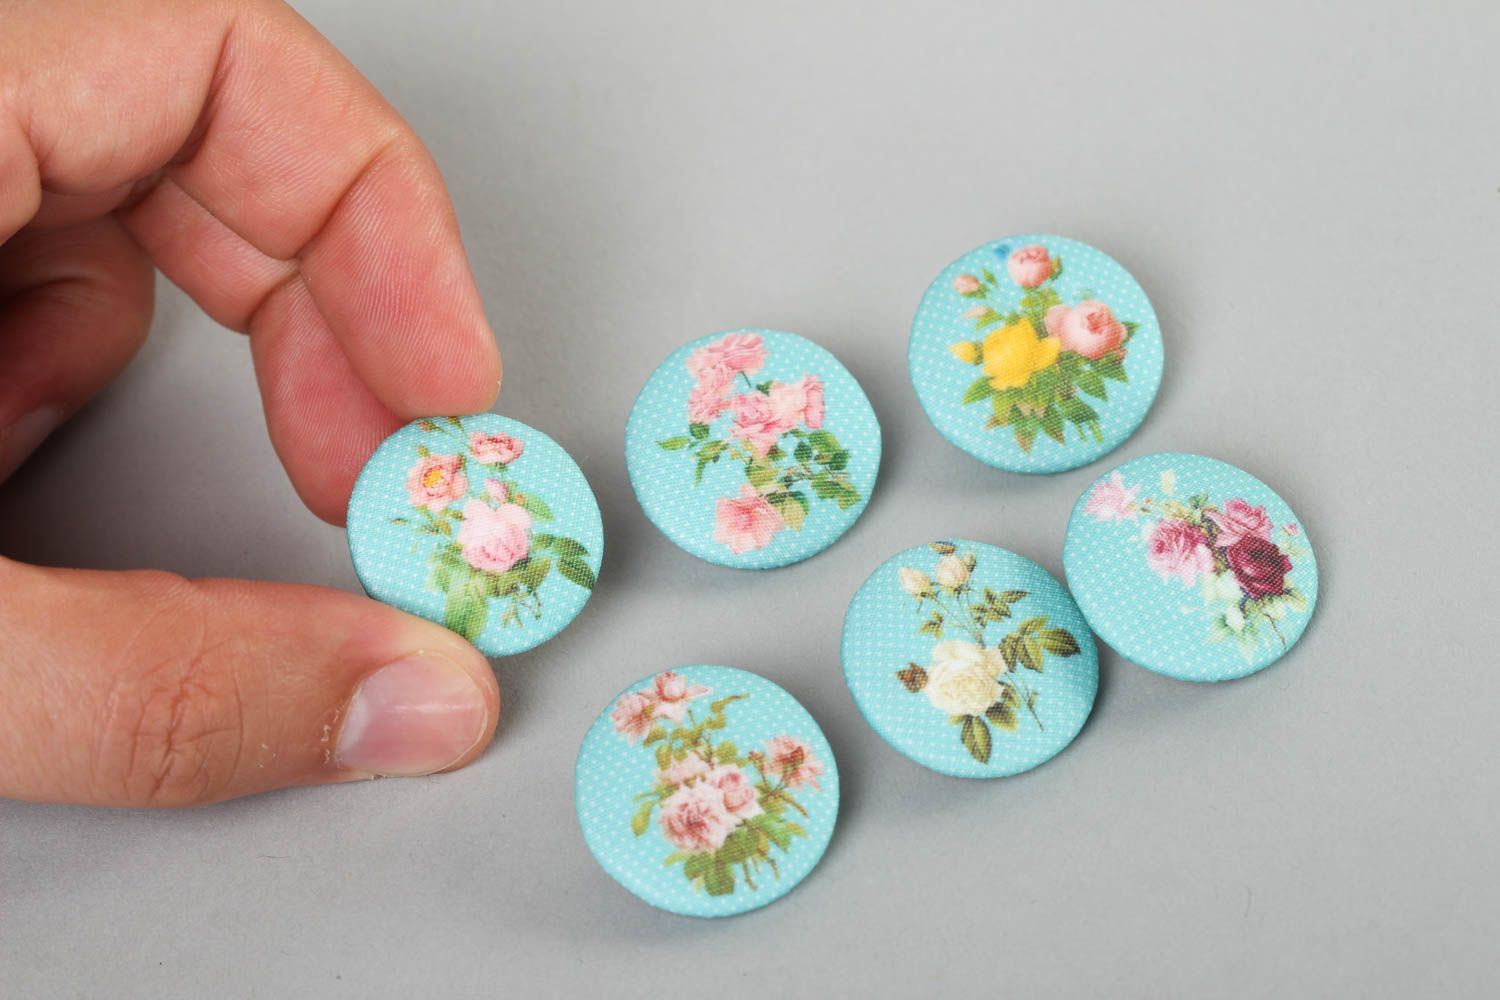 Fittings for clothes 6 handmade buttons needlework supplies sewing accessories photo 5